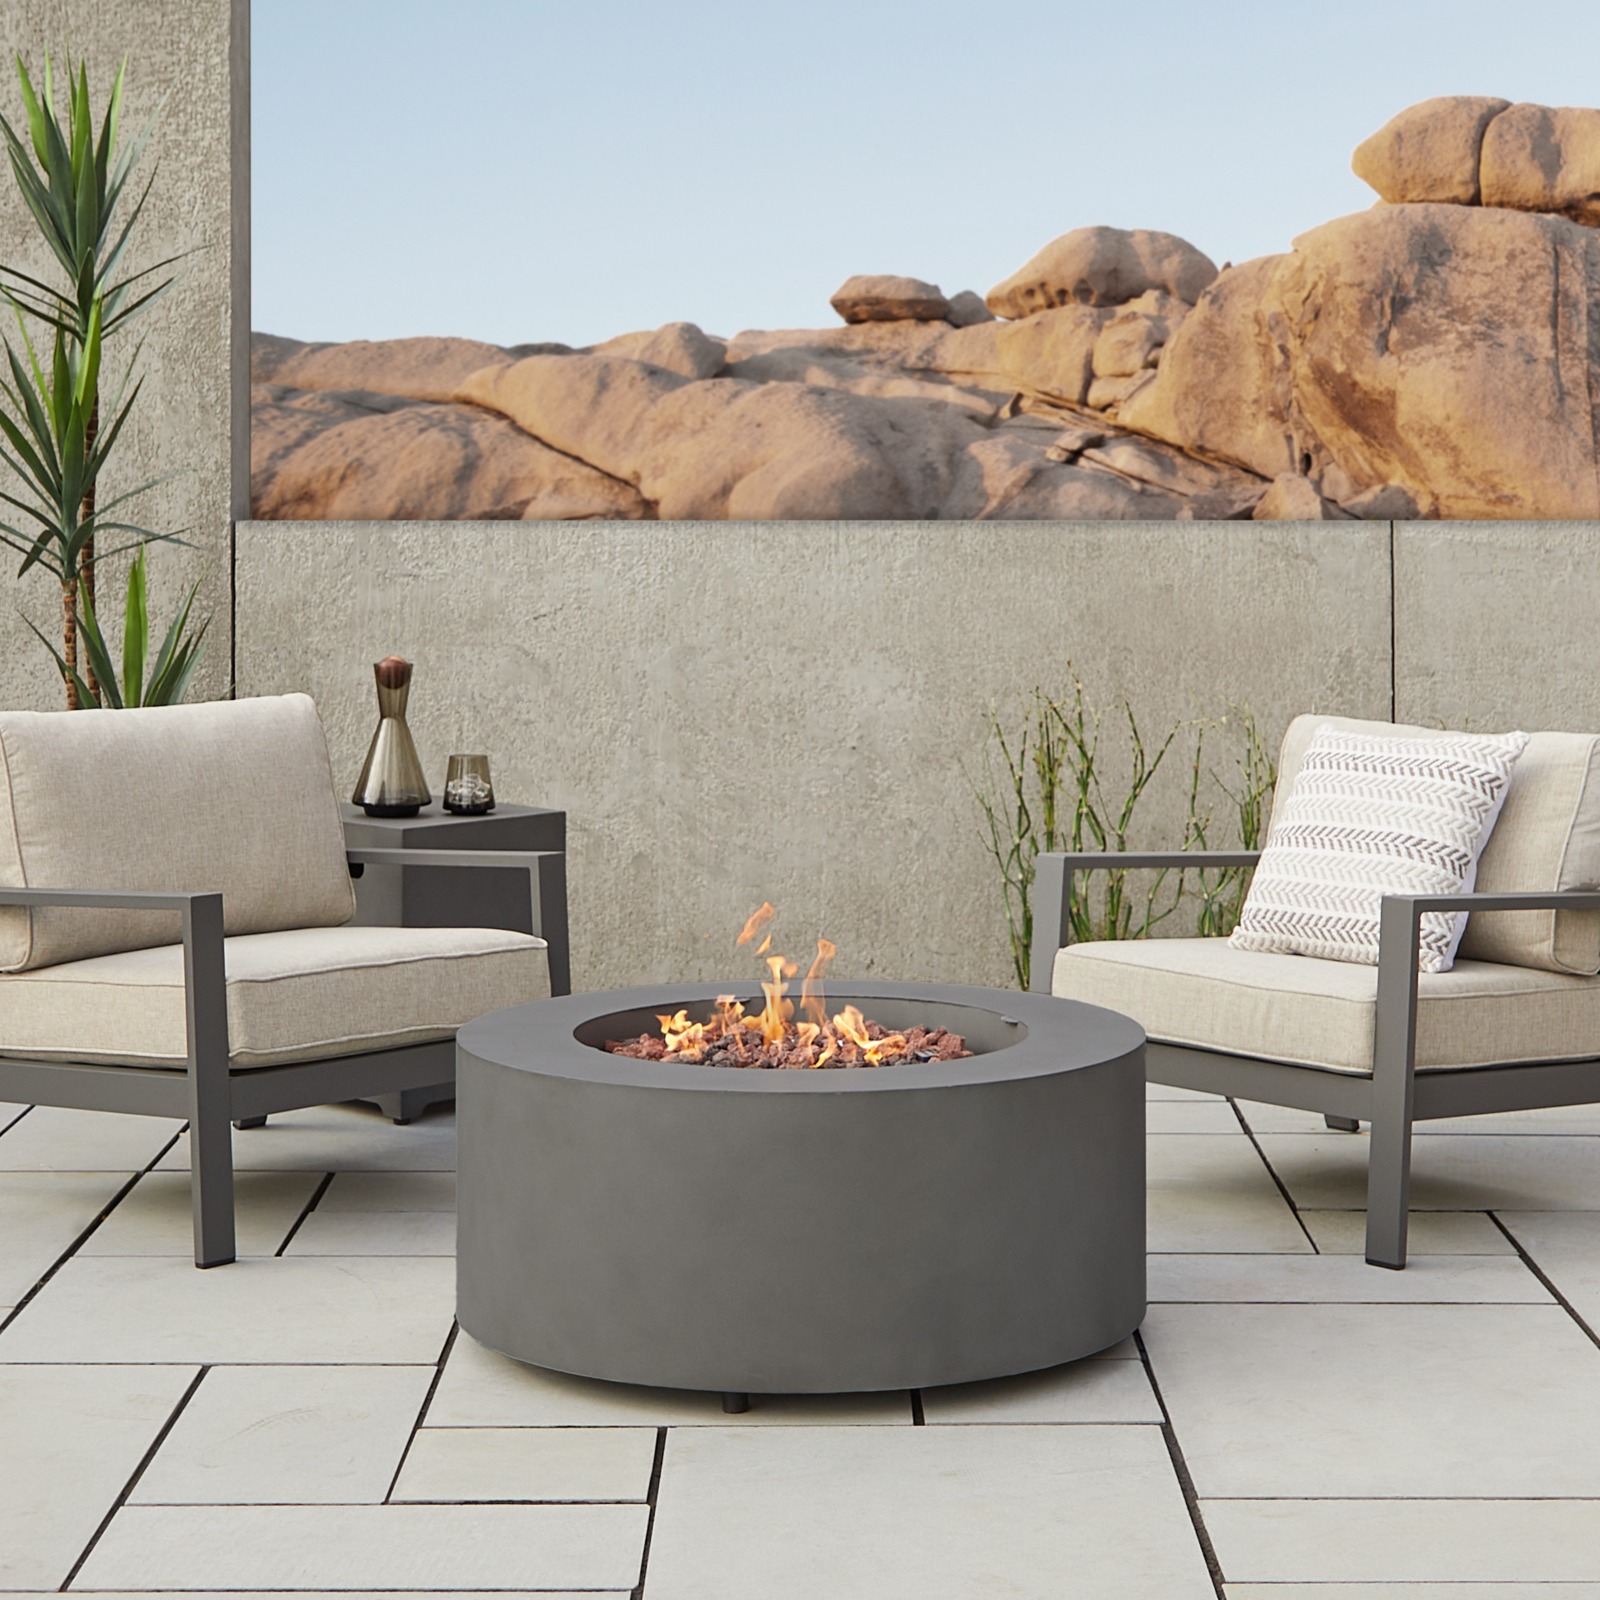 Aegean Round Propane Fire Pit Outdoor Fireplace Fire Table for Backyard or Patio